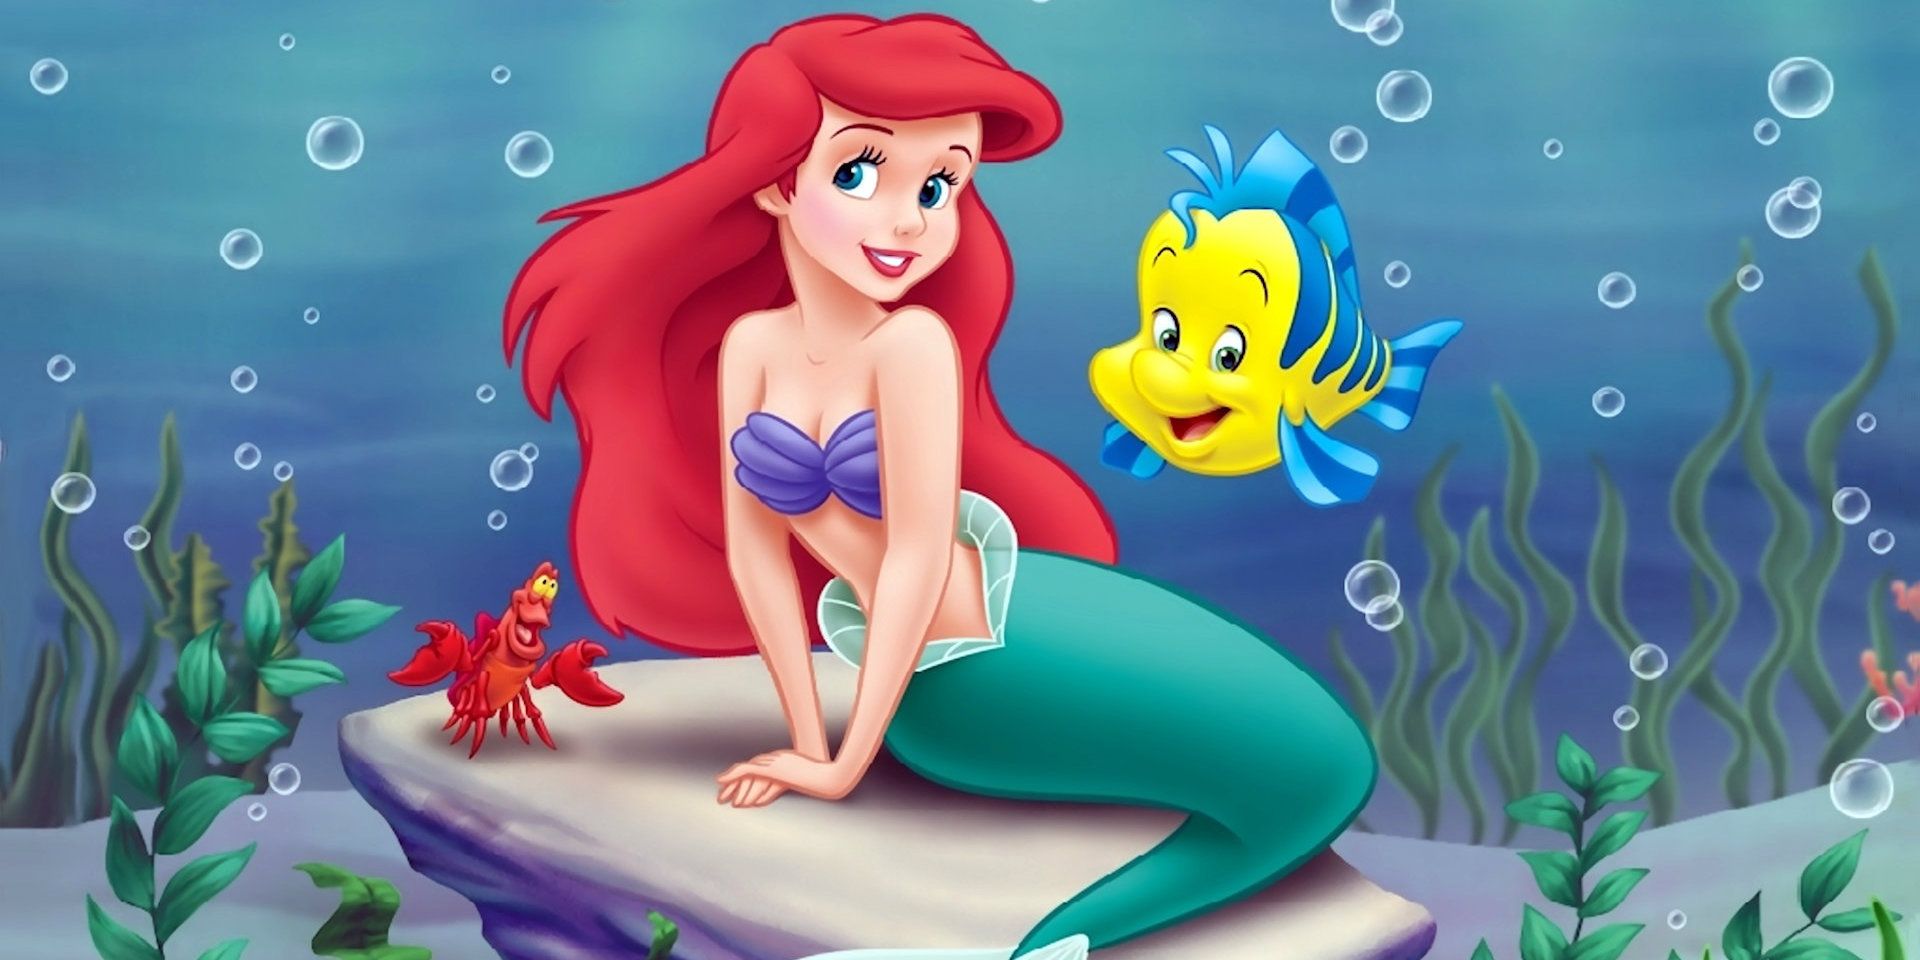 The Little Mermaid: 10 Differences Between The Book And The Film